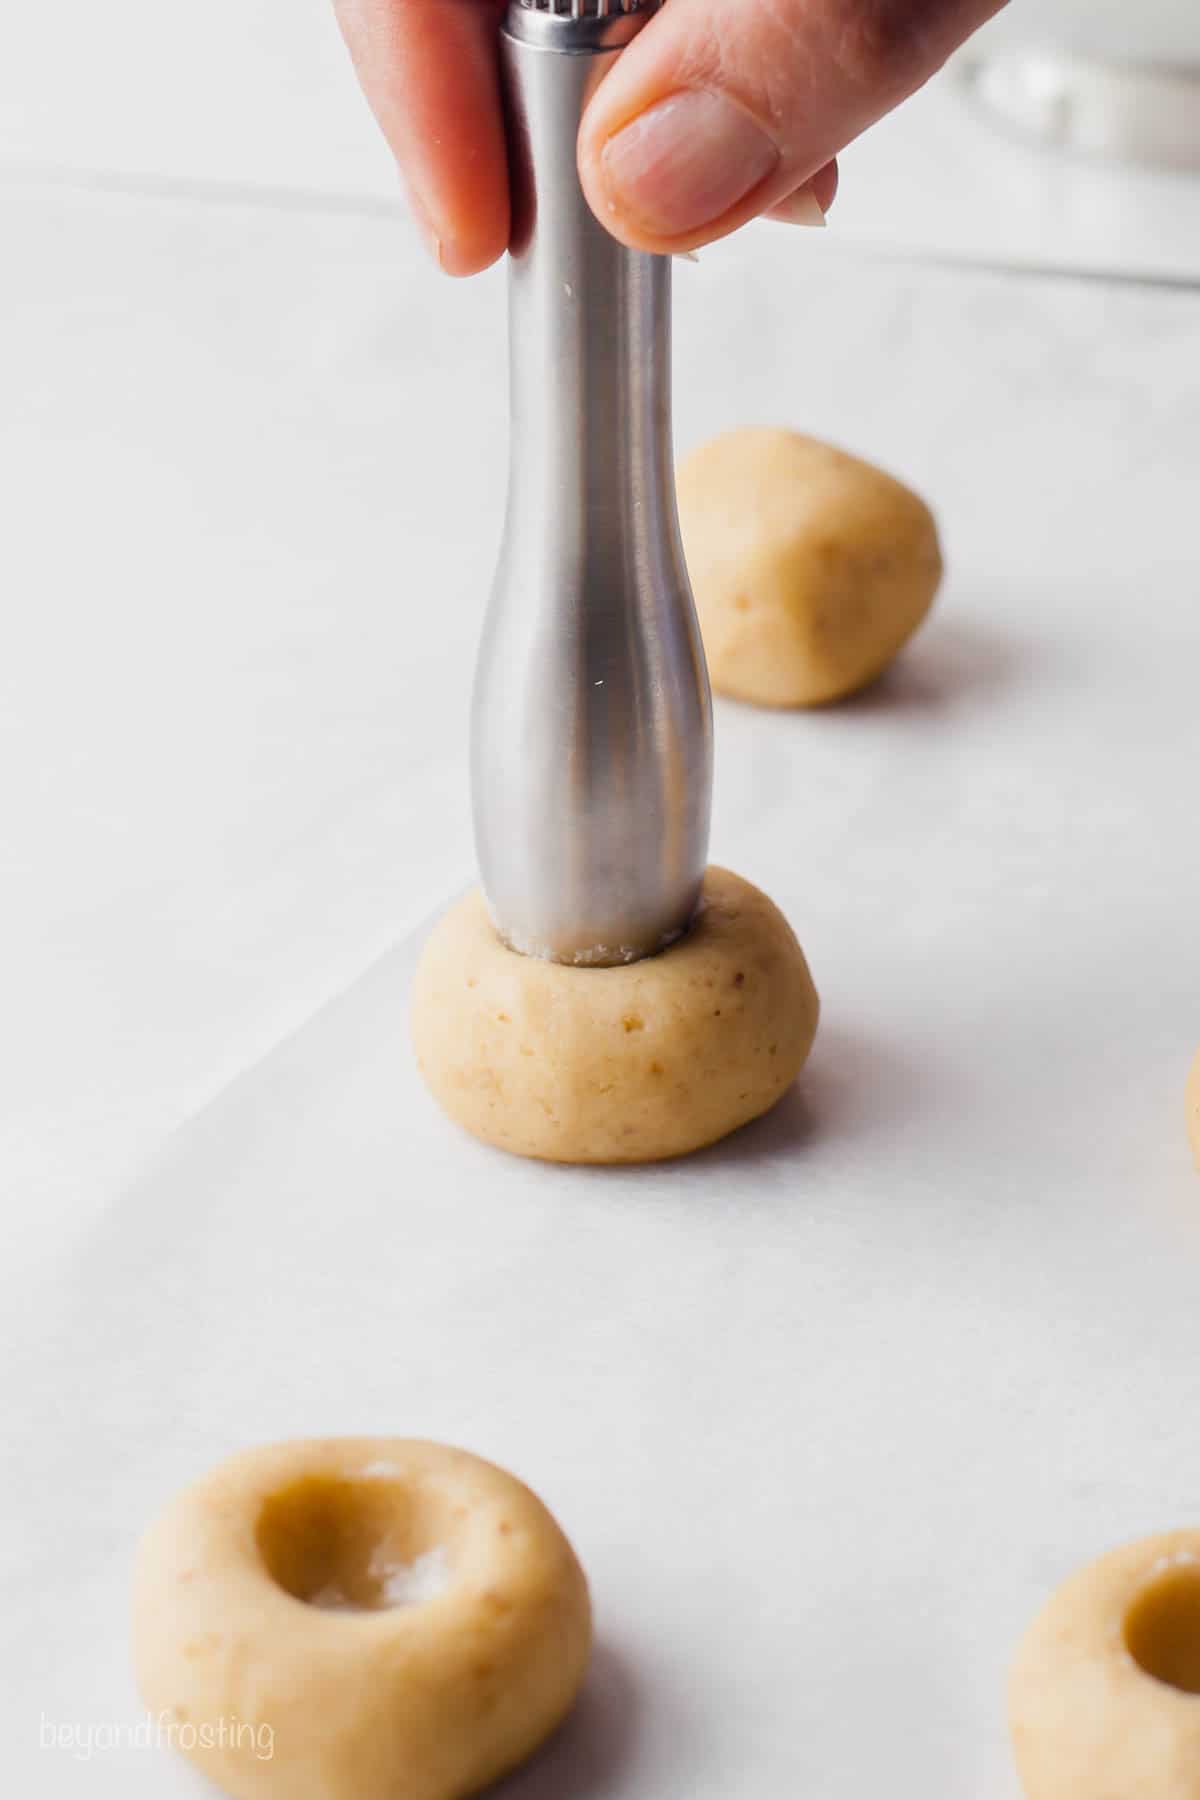 A metal cooking tool being poked into a ball of cookie dough to form a well for the filling